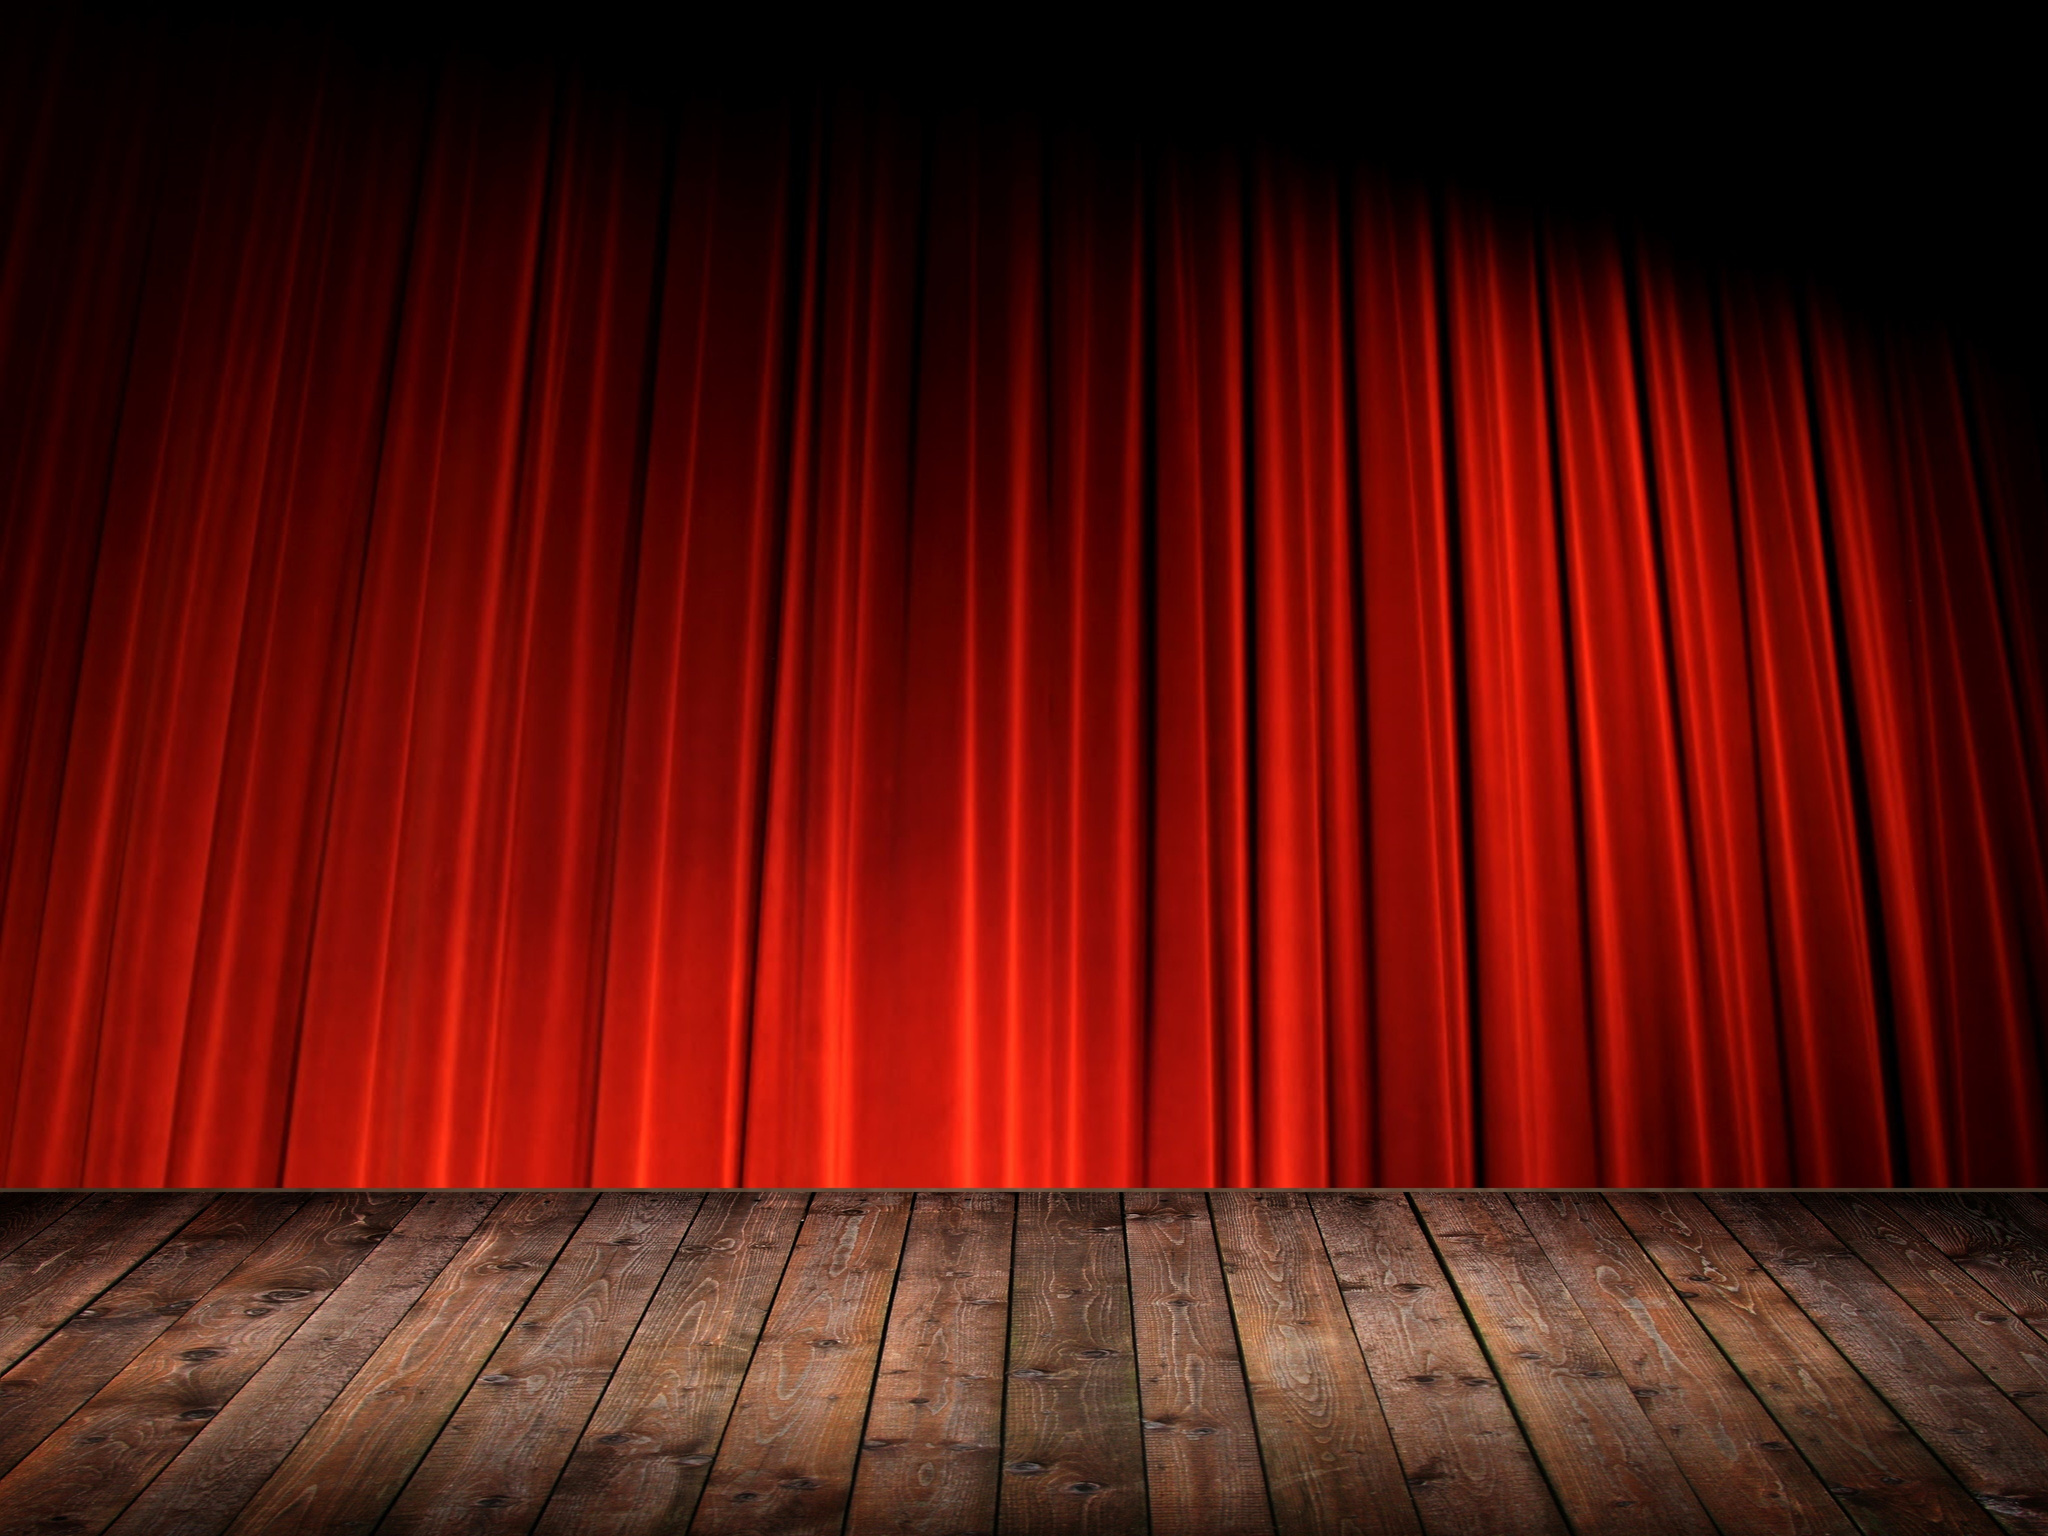 Red Theatre Curtain